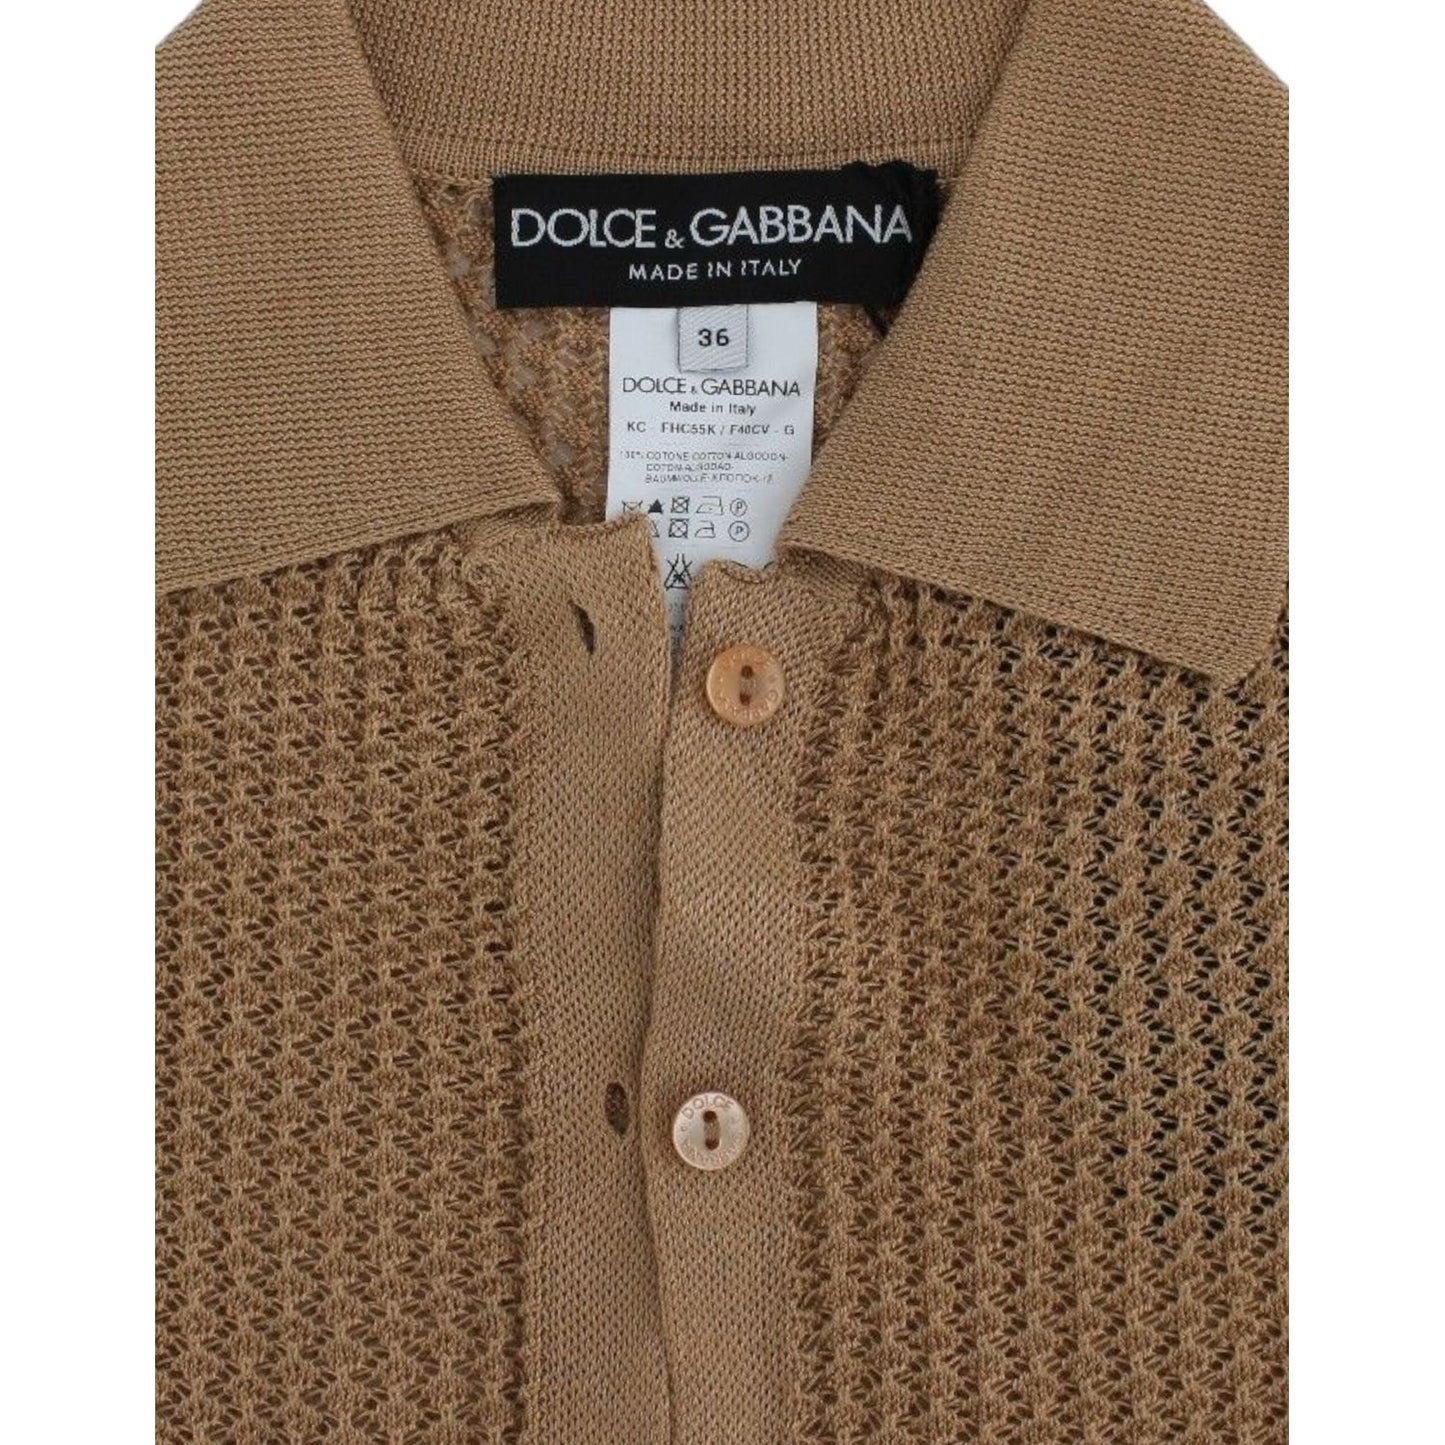 Dolce & Gabbana Beige Knitted Cotton Polo Cardigan Sweater beige-knitted-cotton-polo-cardigan-sweater